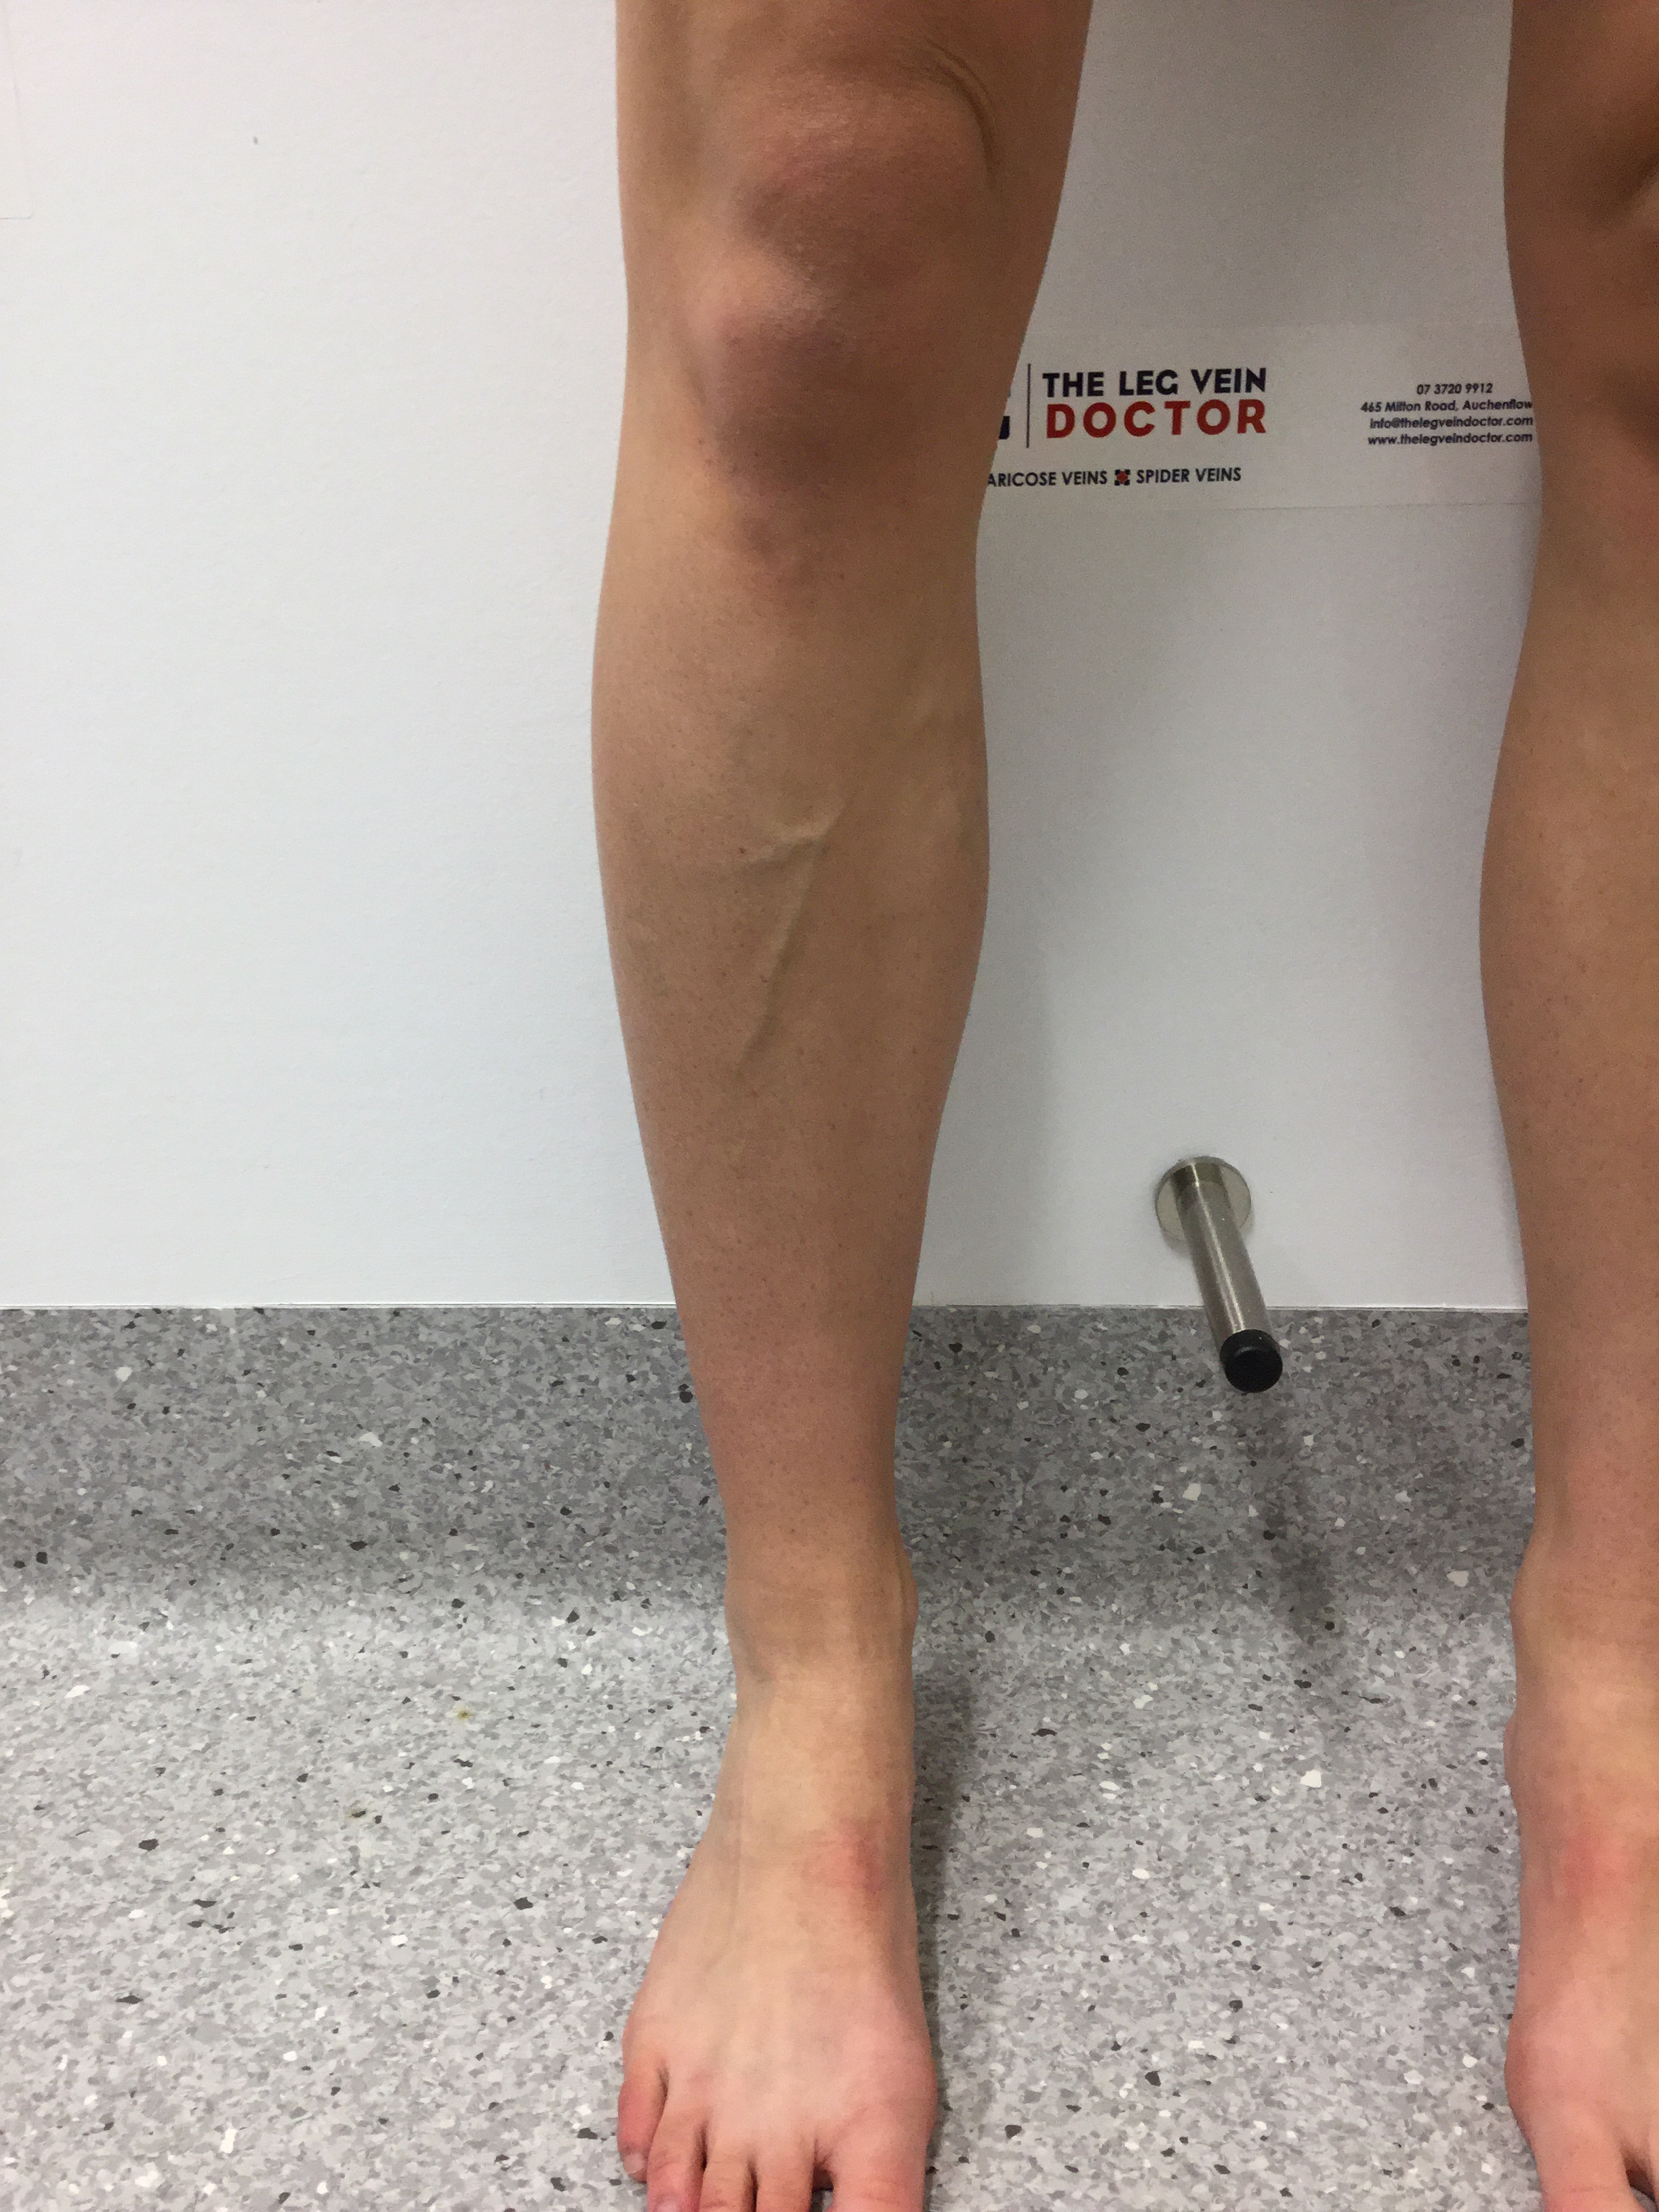 Varicose Vein Results And Post Treatment Photos — The Leg Vein Doctor